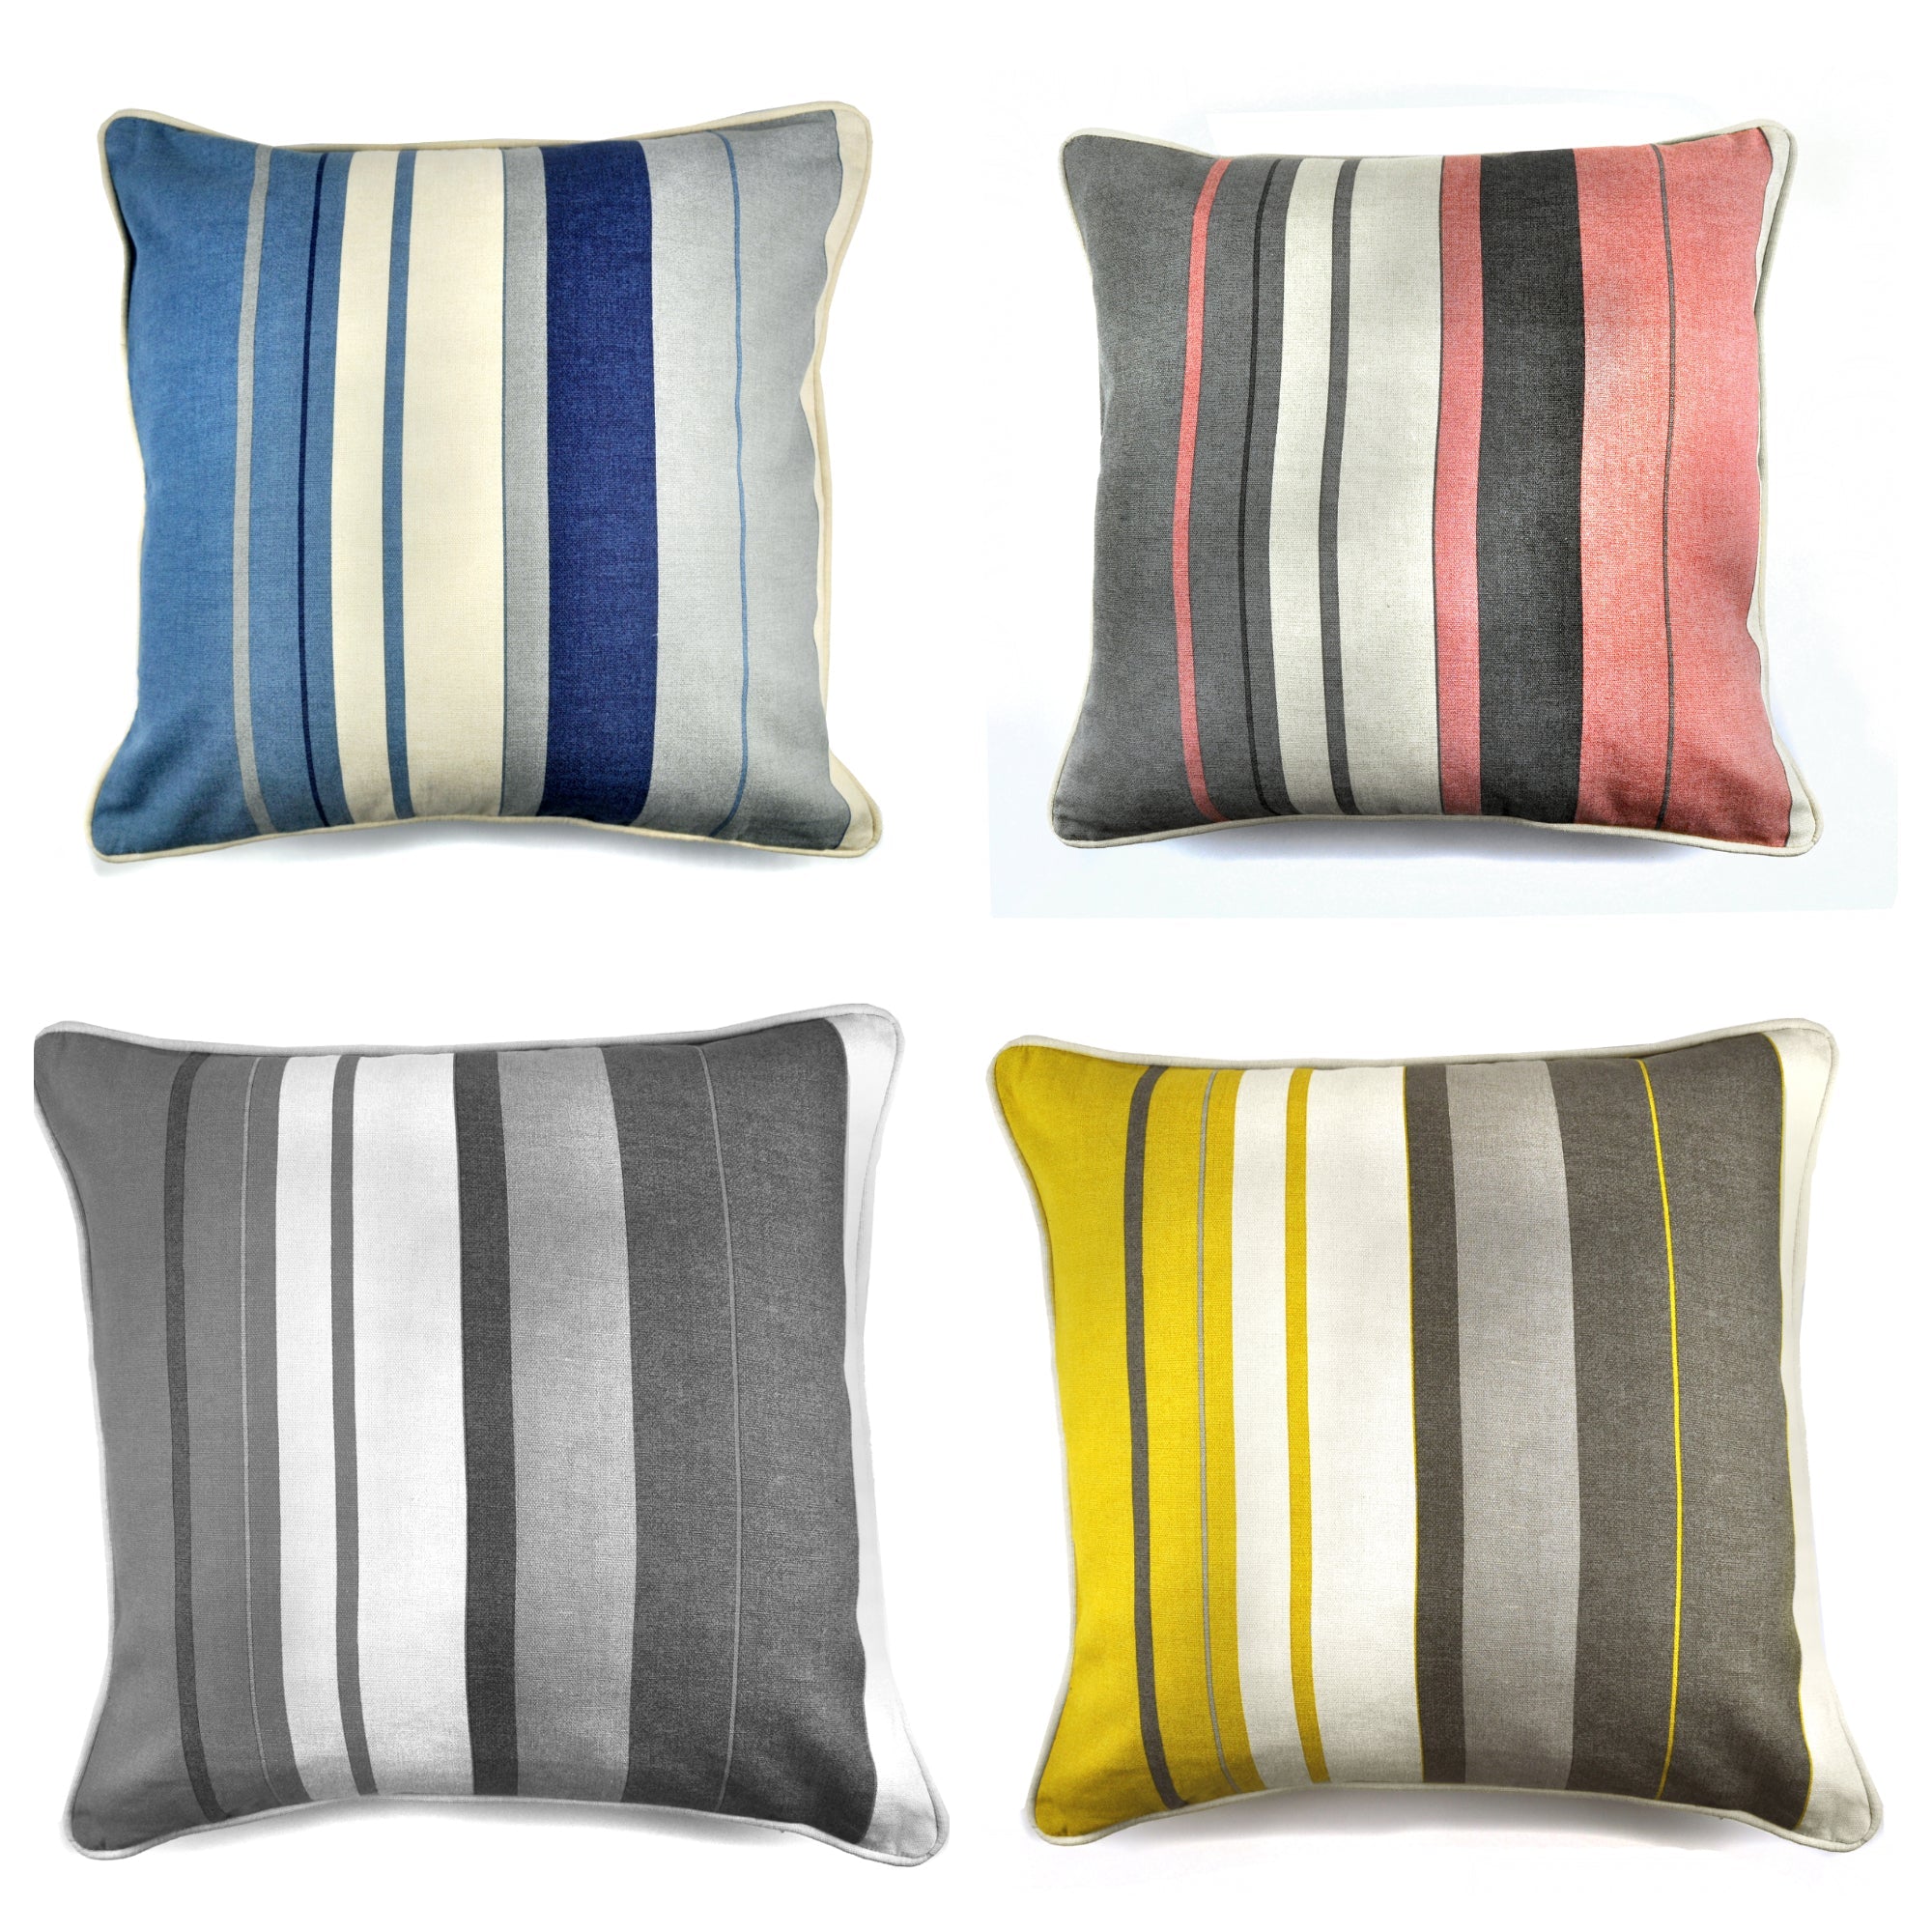 Whitworth Stripe- Square Cushion Covers - by Fusion